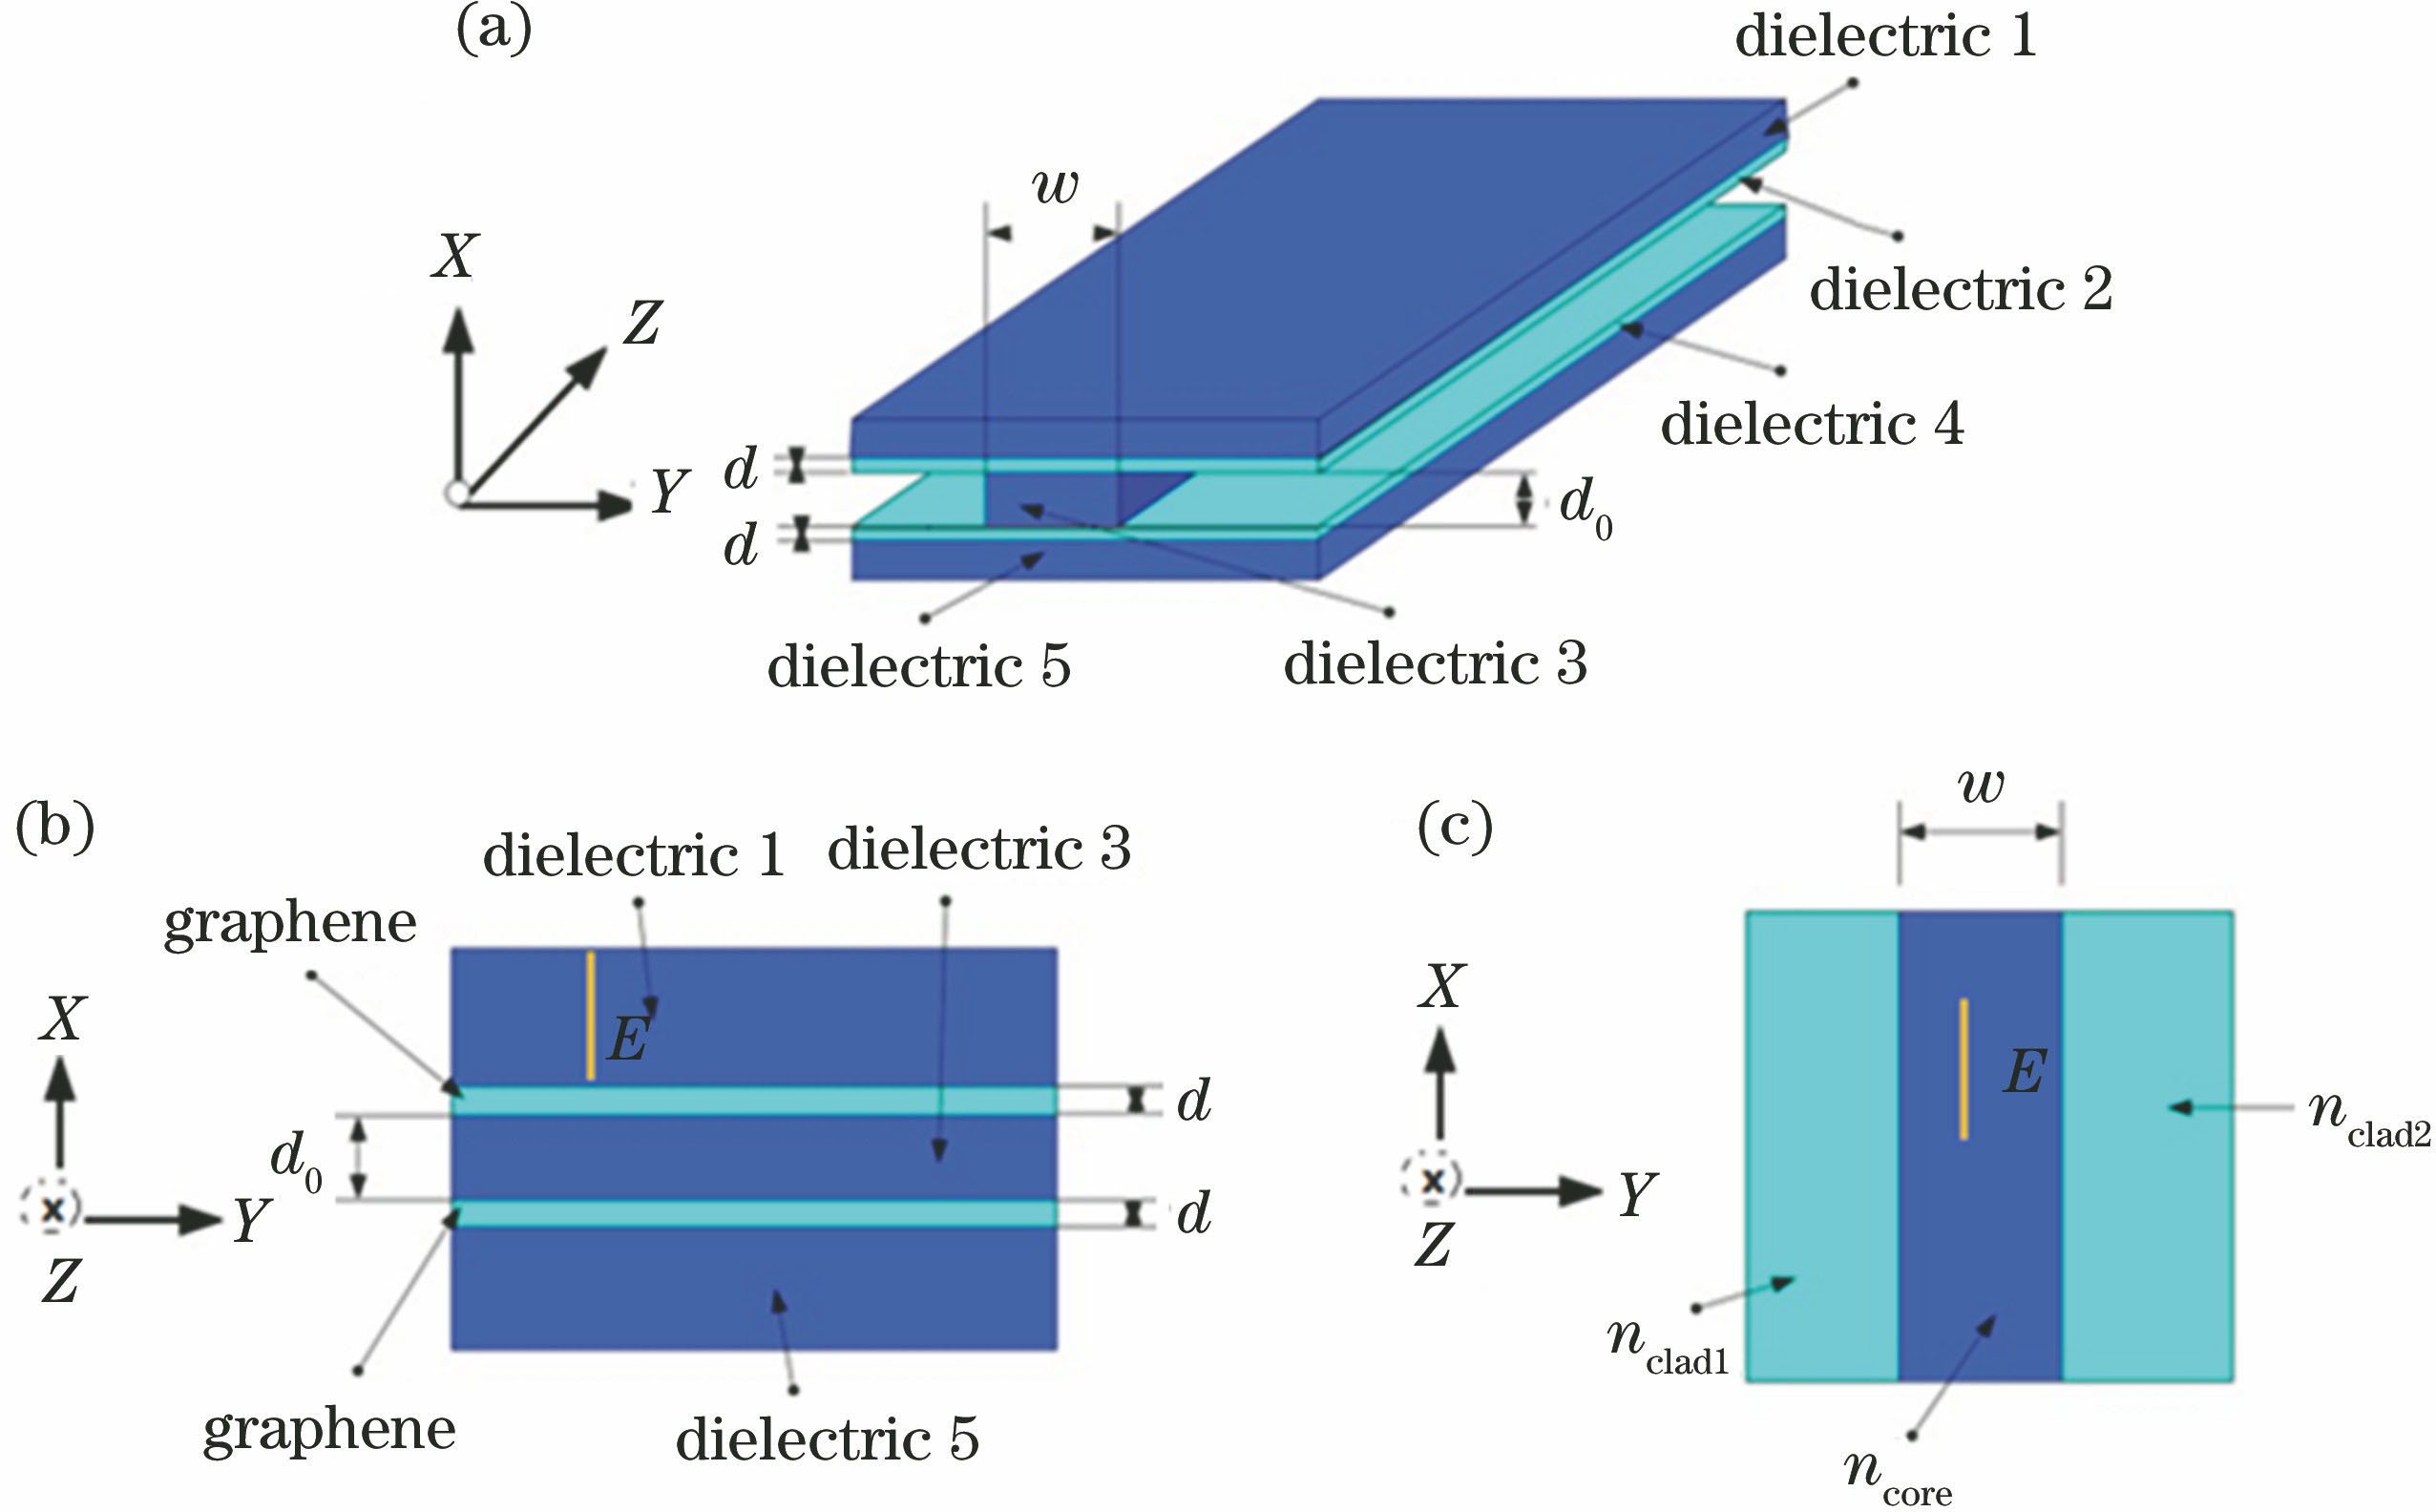 DLTGSSPW. (a) Theoretical model; (b) equivalent five-layer planar waveguide structure of D1/G/D3/G/D5; (c) equivalent three-layer planar waveguide structure